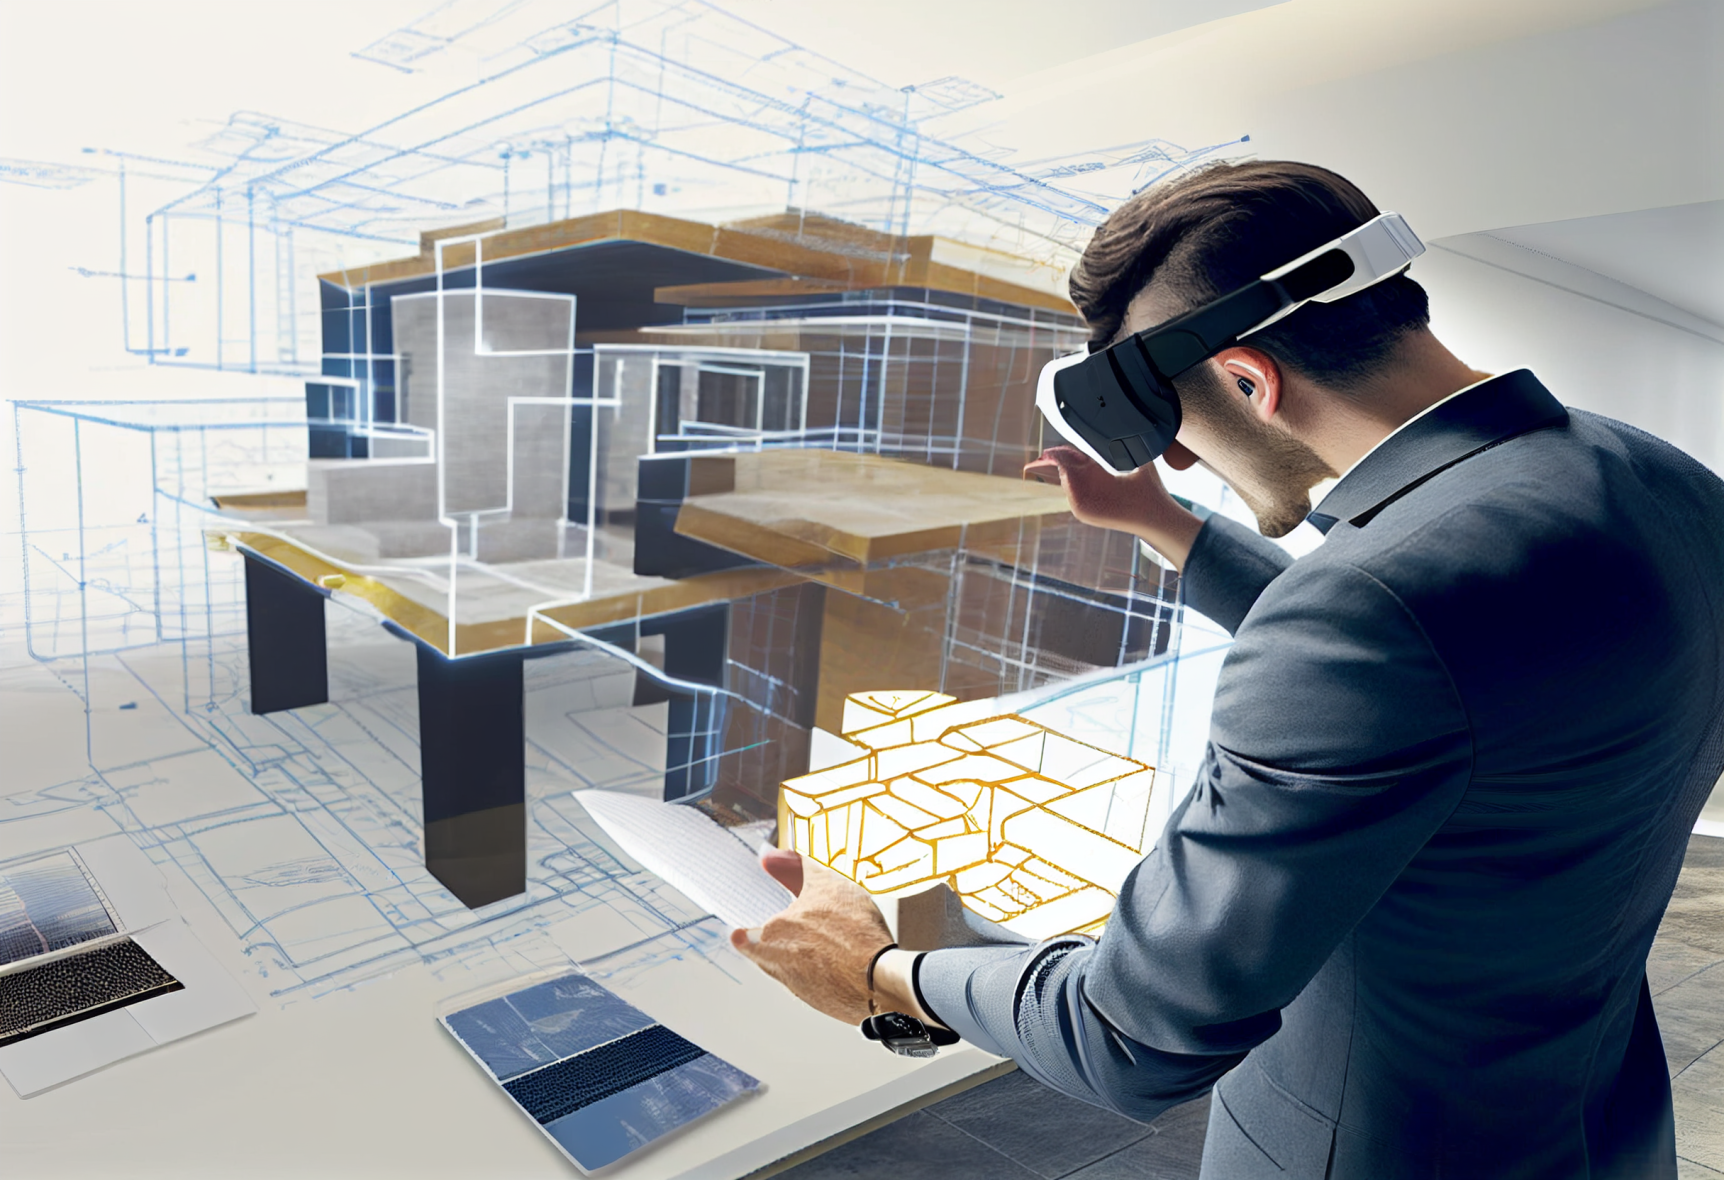 Integration_of_virtual_reality_in_architecture_and_de_18a941e8-d884-4ef2-9db1-ede67c8033b0